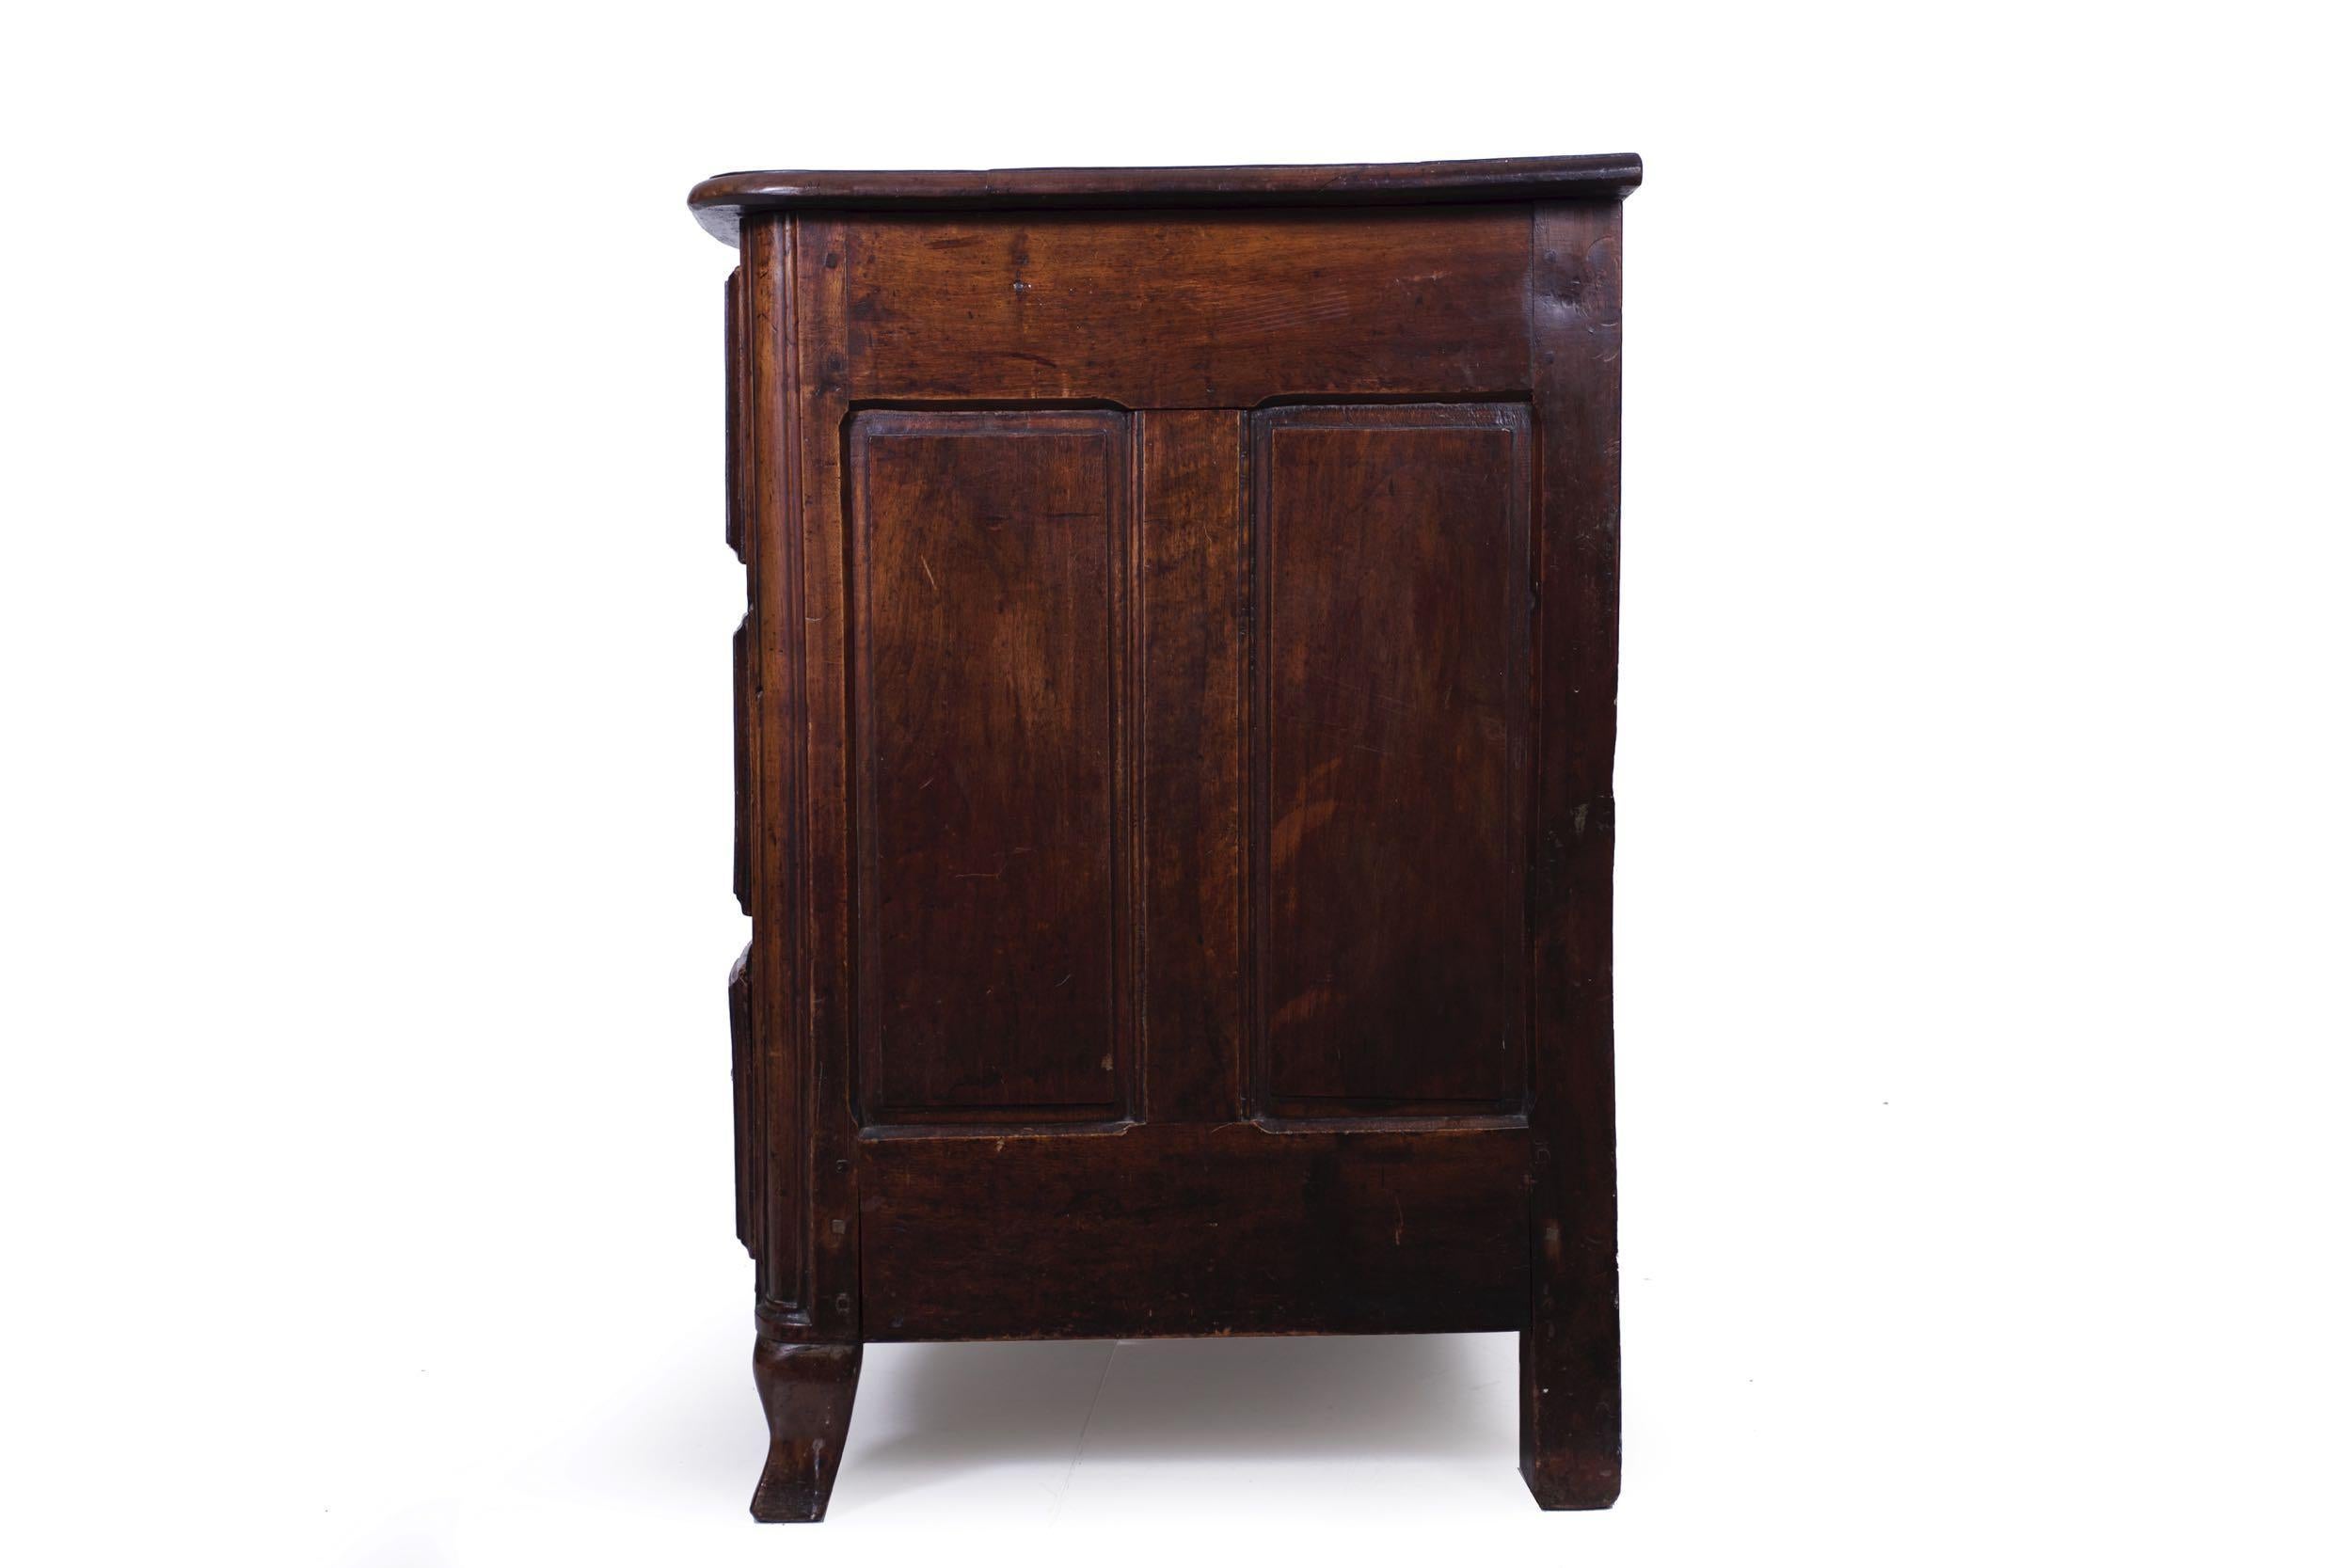 Regency 18th Century Regencé Period Walnut Commode Chest of Drawers, circa 1730-1750 For Sale